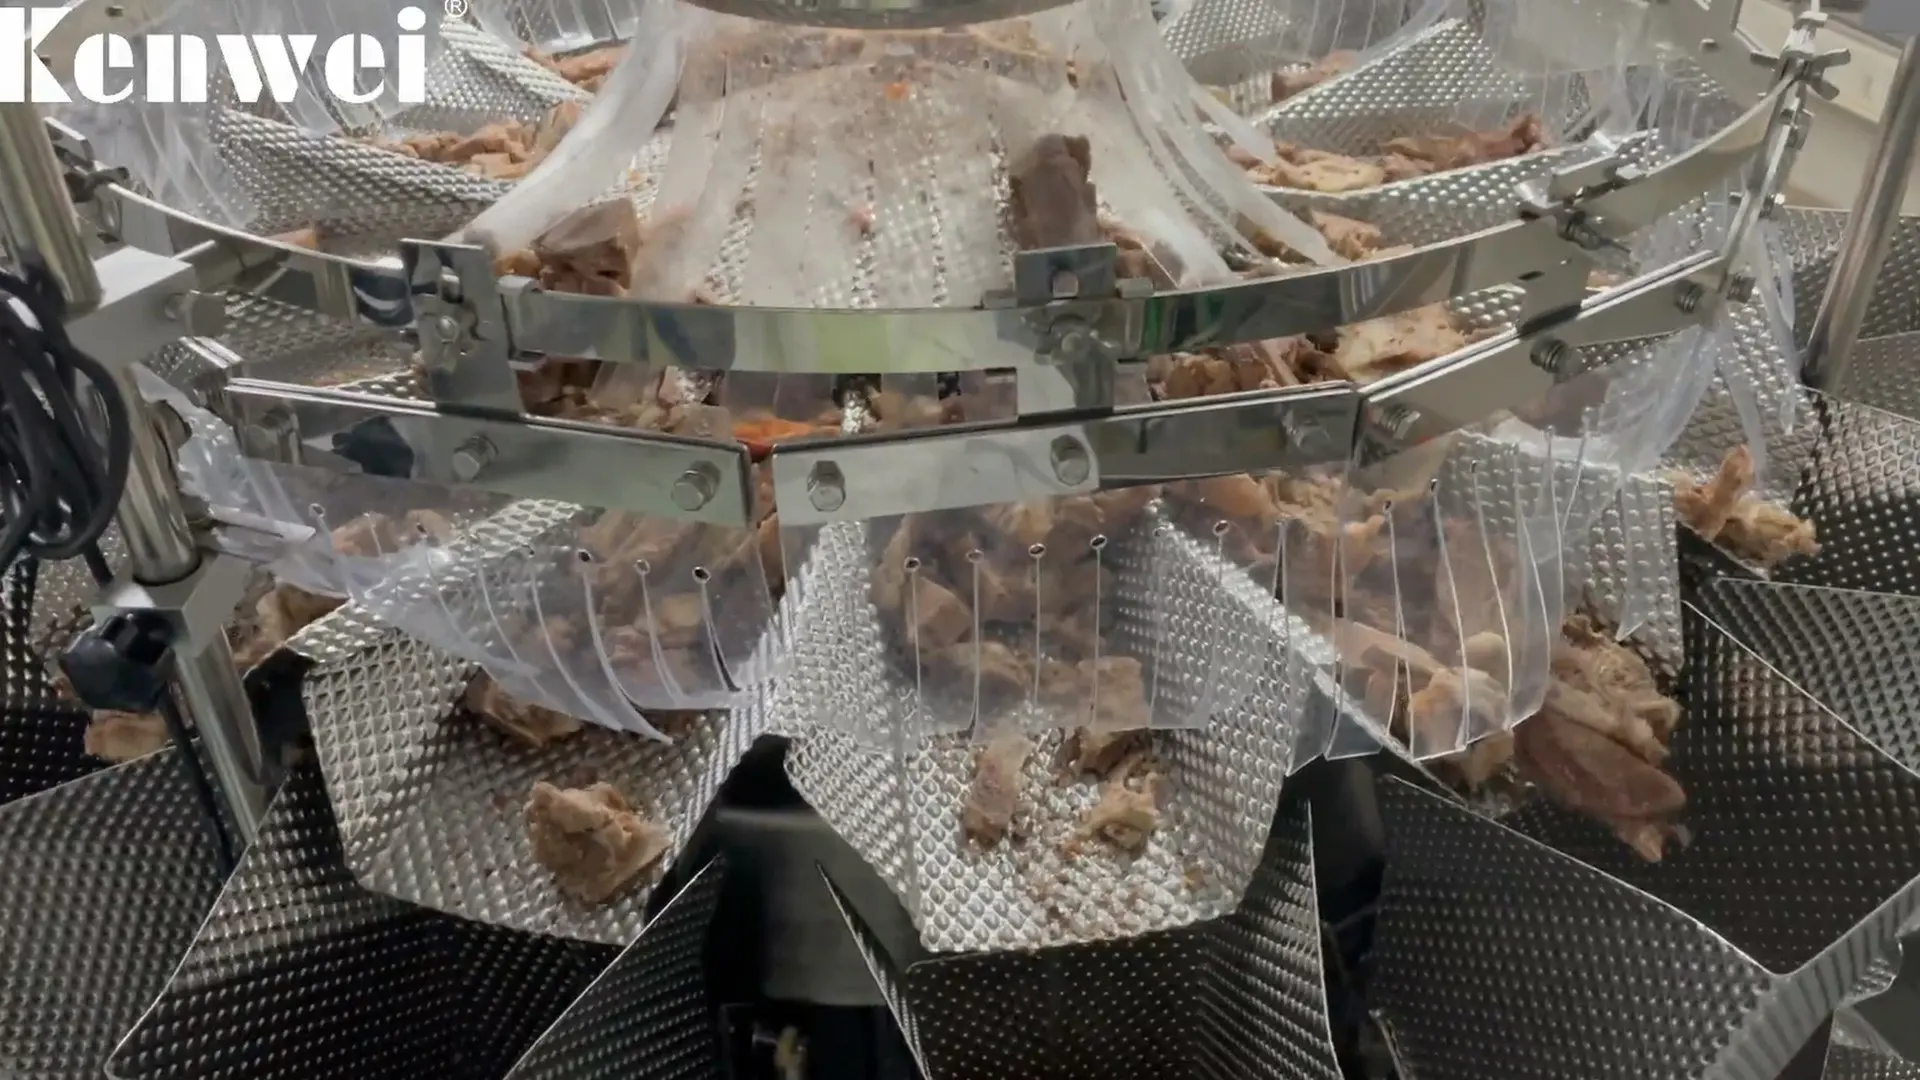 14 Head multihead weigher for weighing 350g cooked beef spine